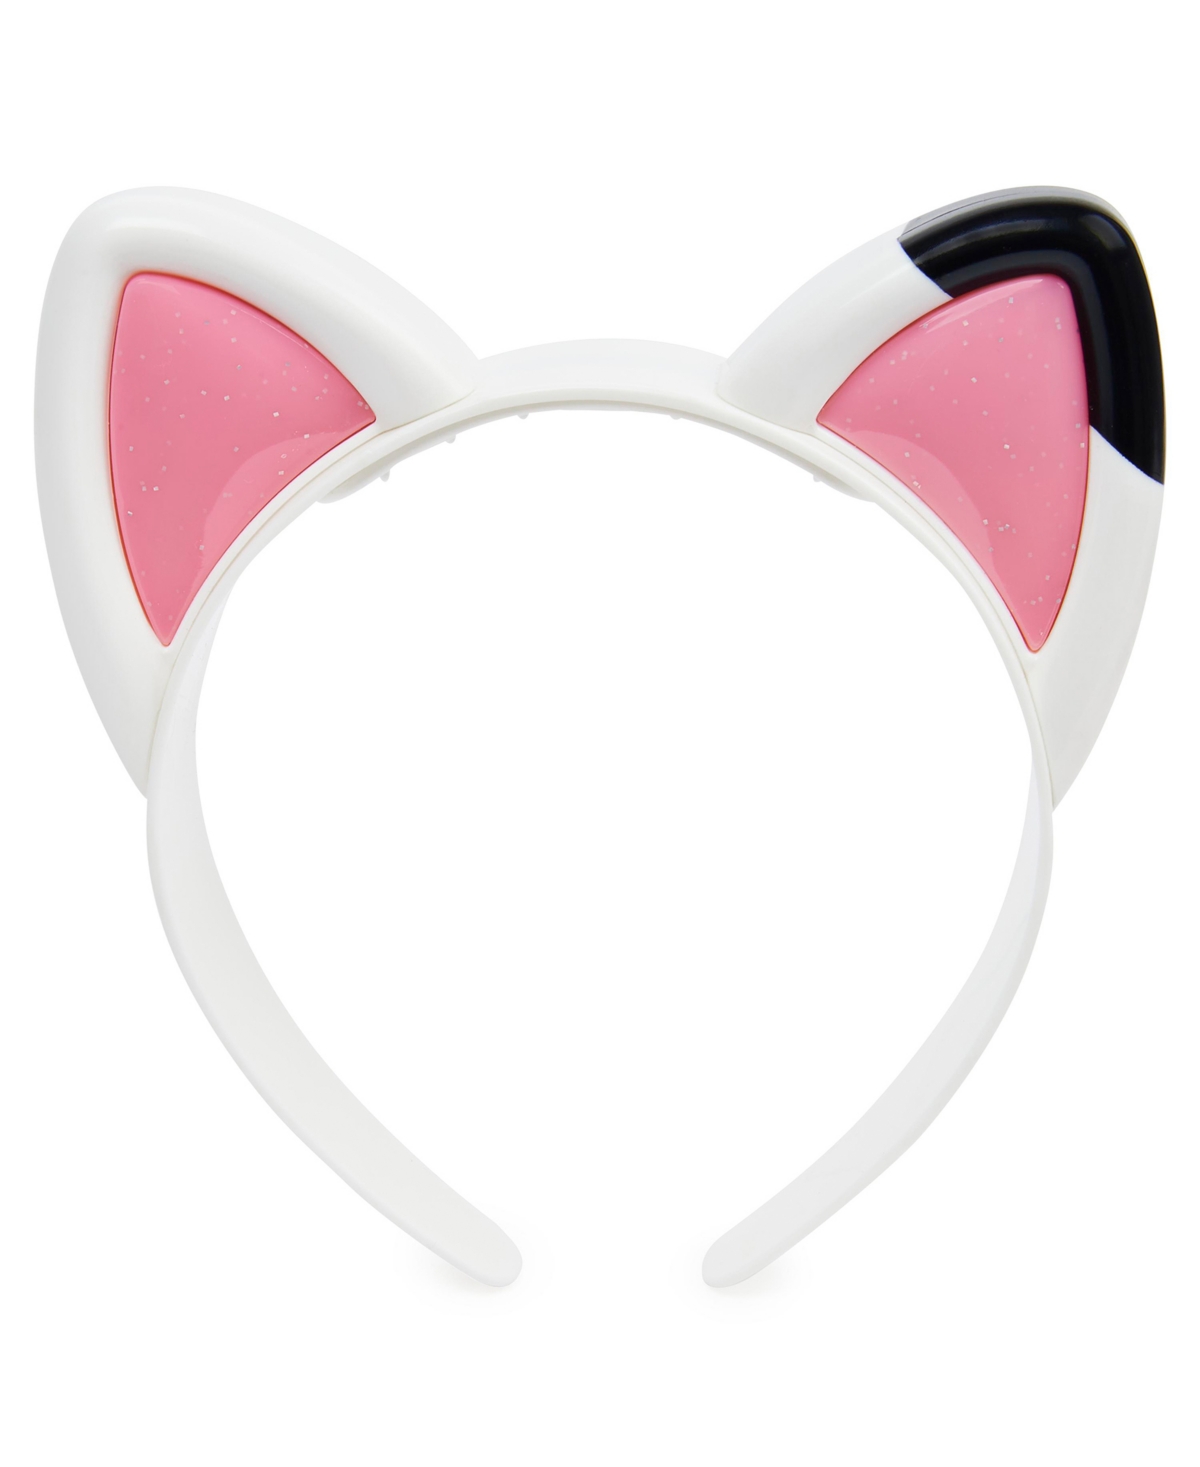 Gabby's Dollhouse Kids' Magical Musical Cat Ears With Lights, Music, Sounds And Phrases In Multi-color